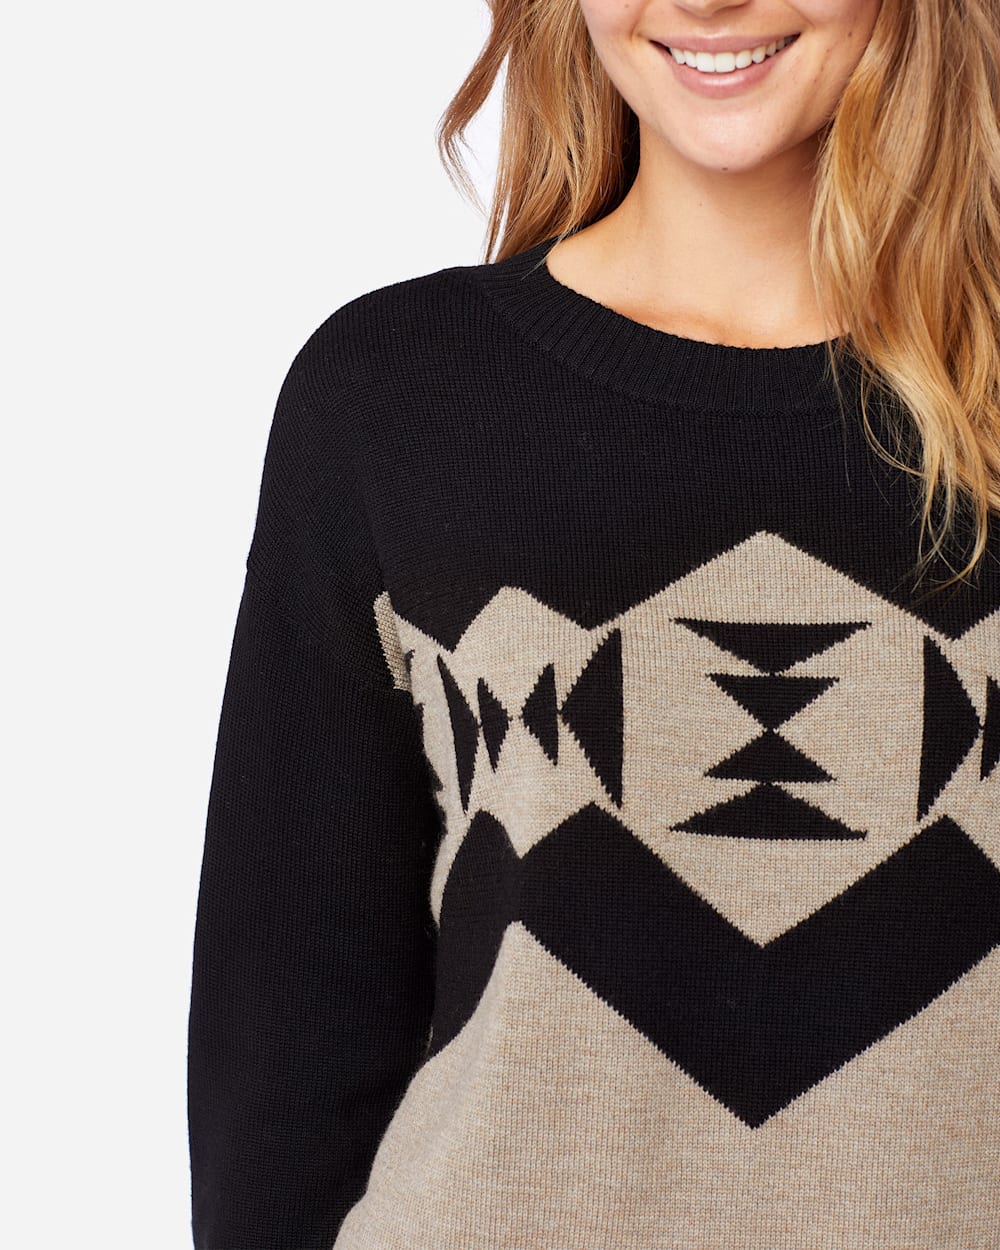 ALTERNATE VIEW OF WOMEN'S SONORA MERINO PULLOVER IN TAUPE HEATHER/BLACK image number 4